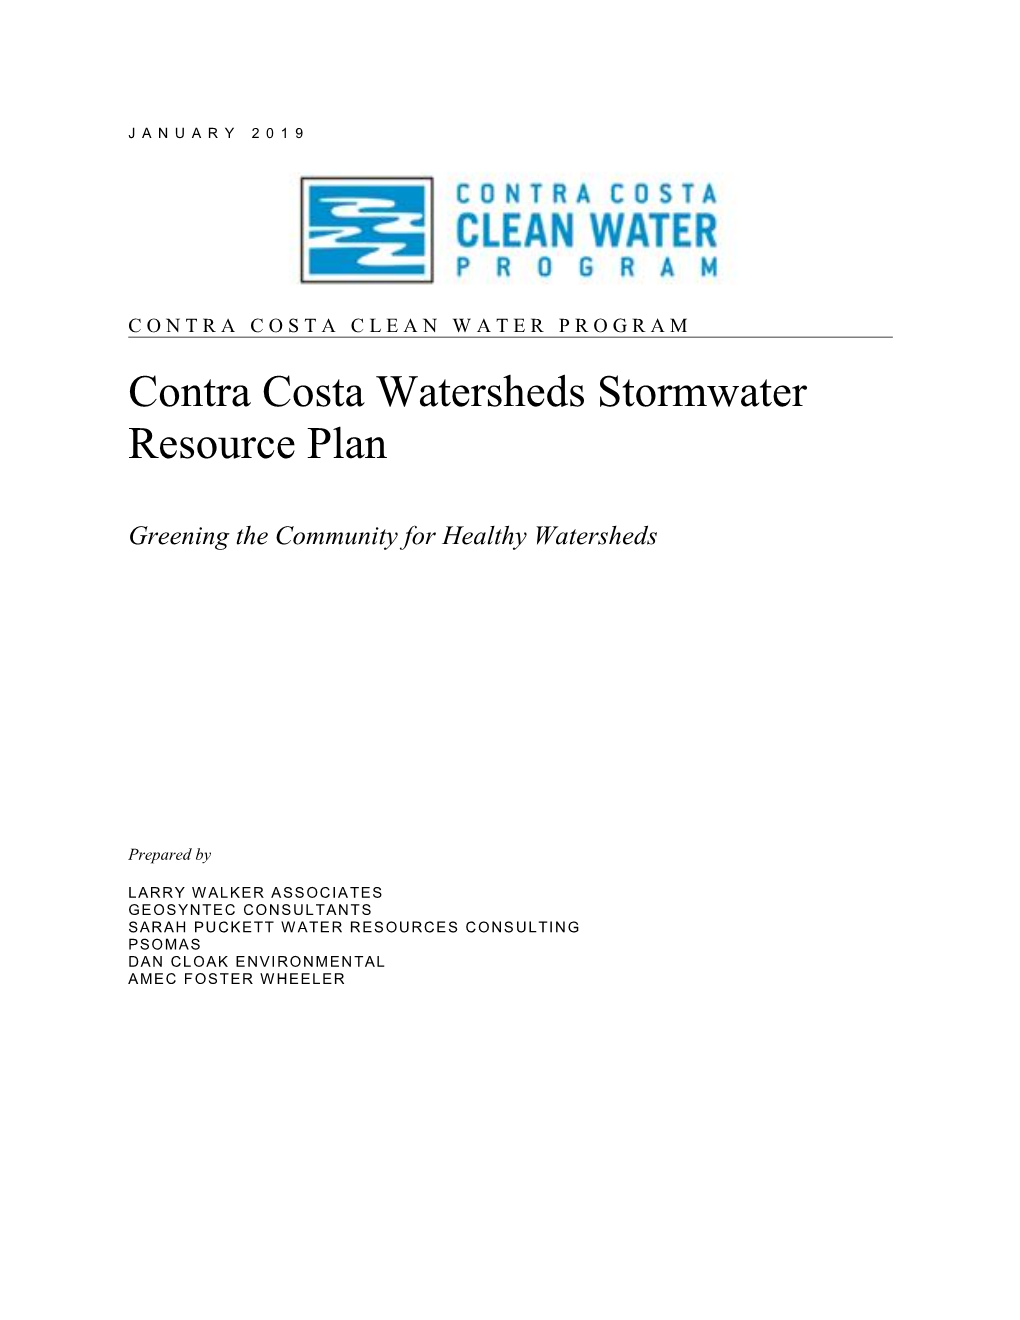 Contra Costa Watersheds Stormwater Resource Plan